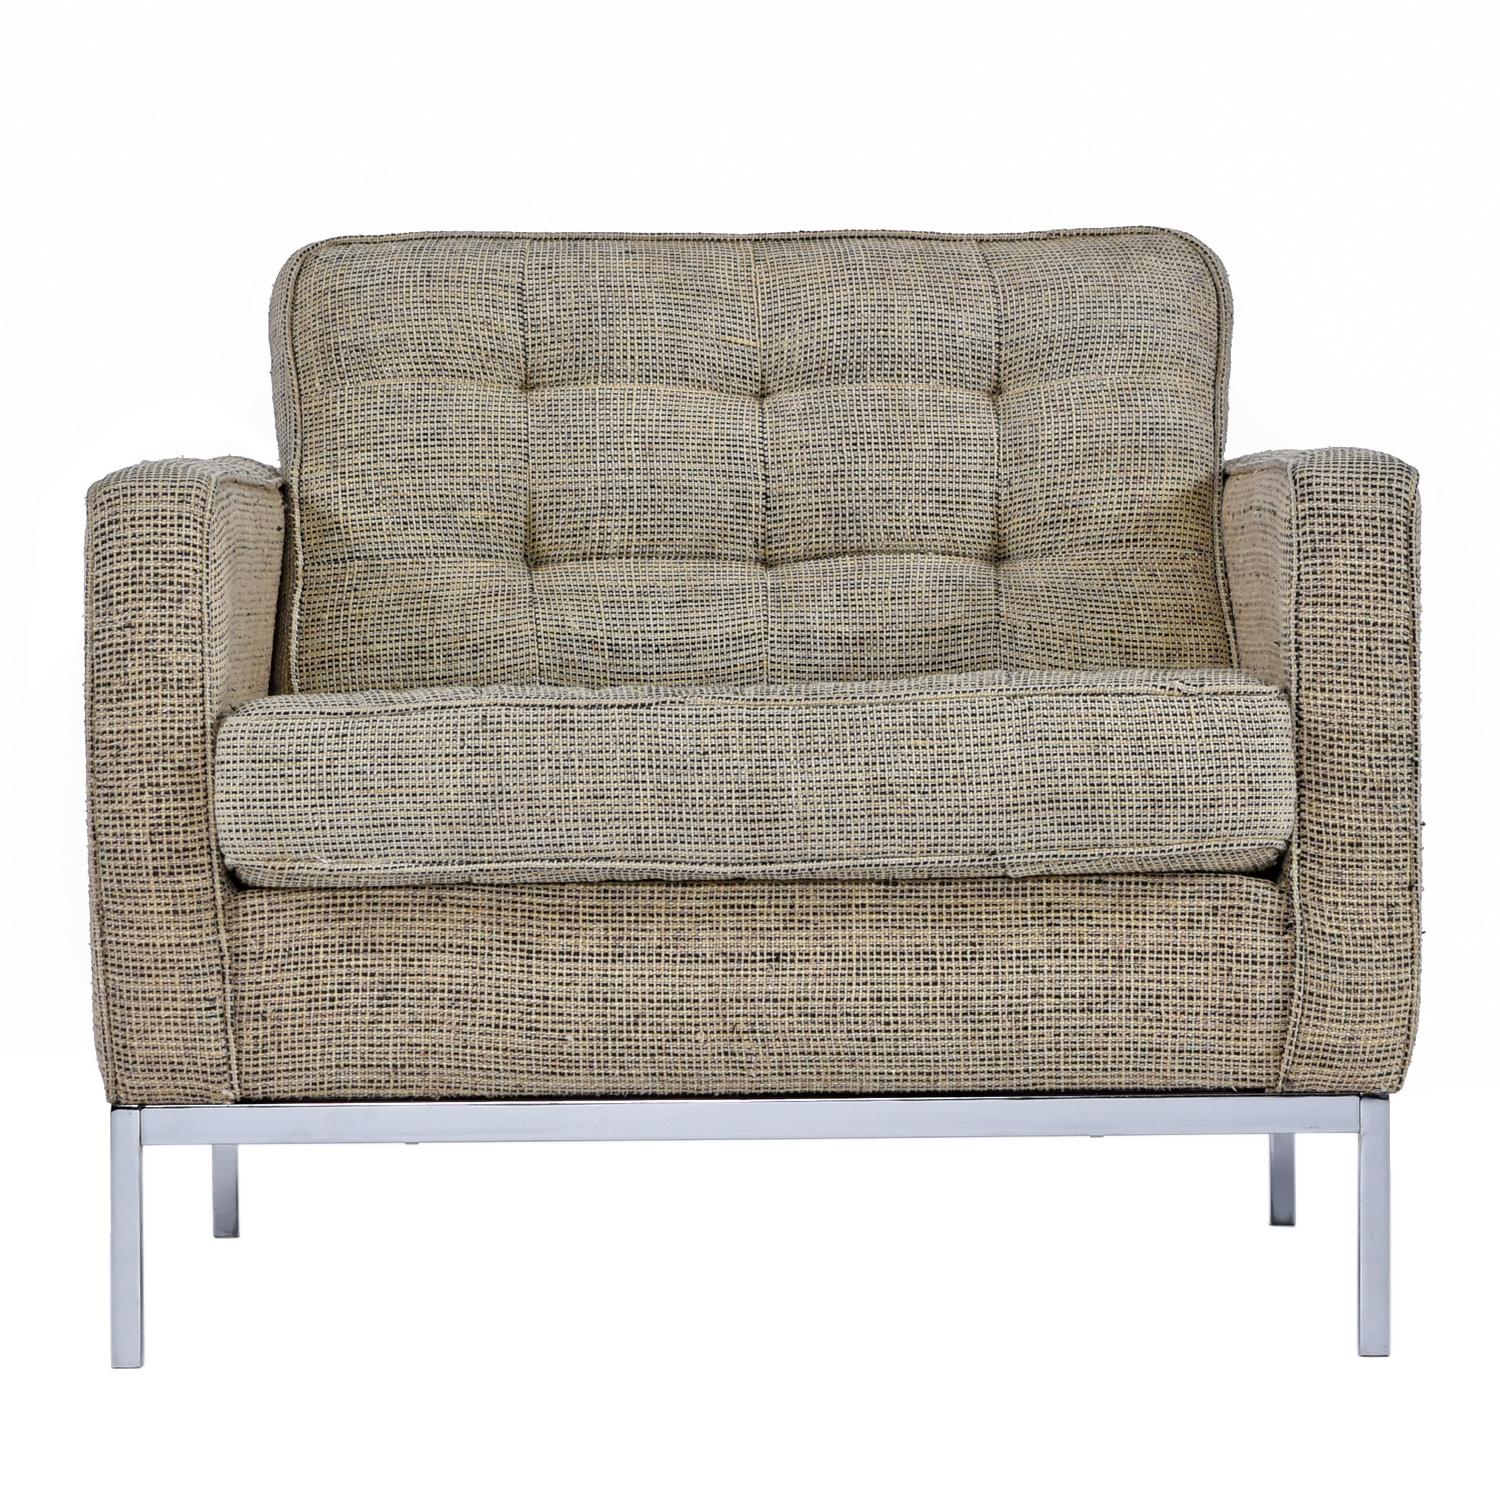 Mid-Century Modern Florence Knoll Sofa & Chair Set on Steel Bases in Heather Grey Tweed Fabric